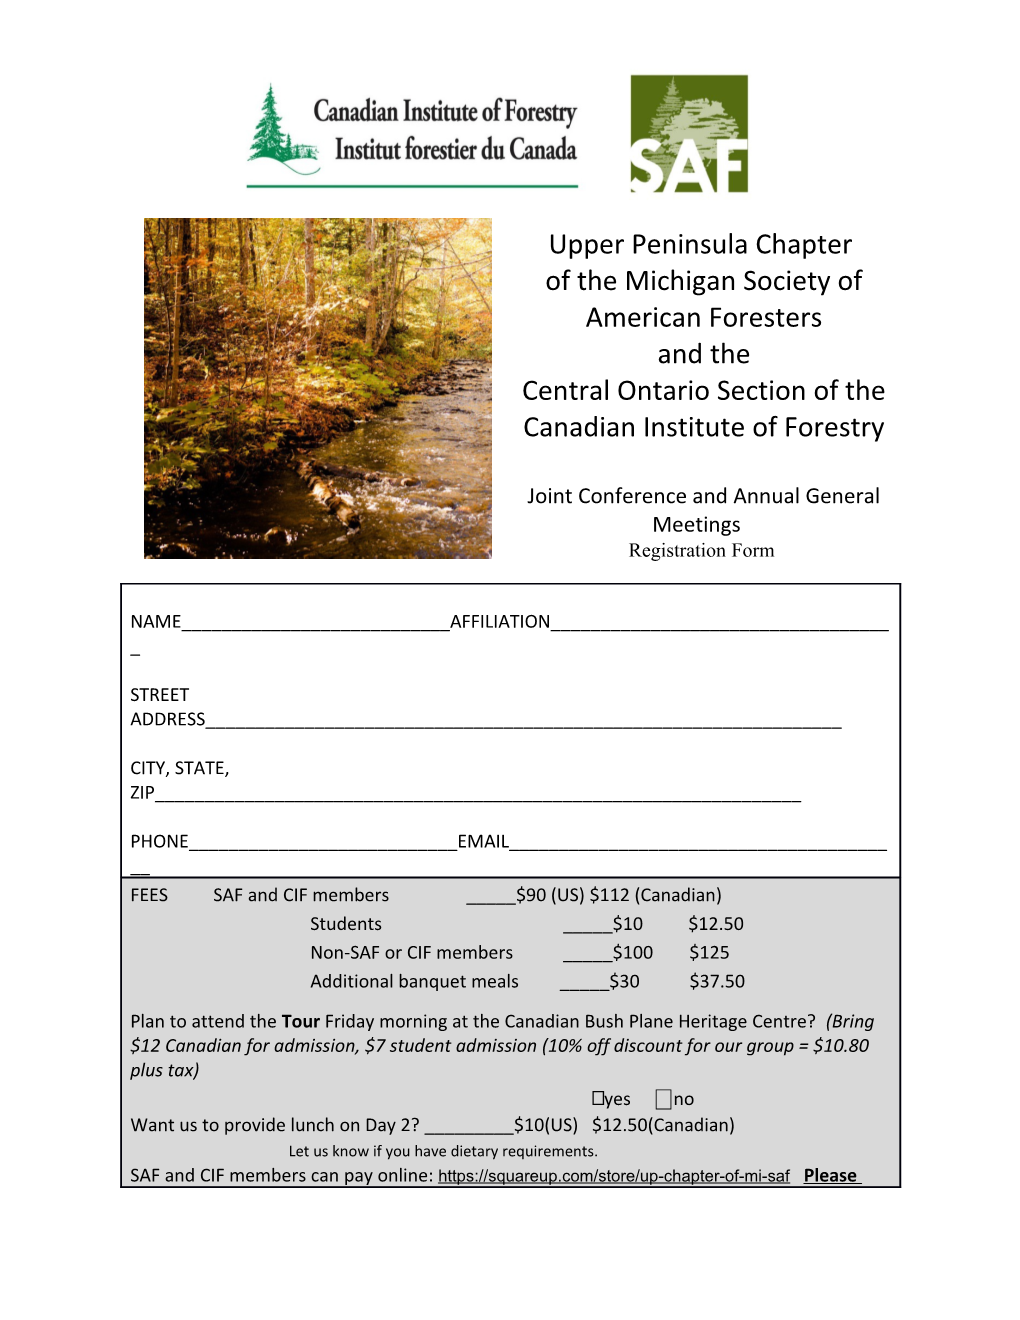 Of the Michigan Society of American Foresters